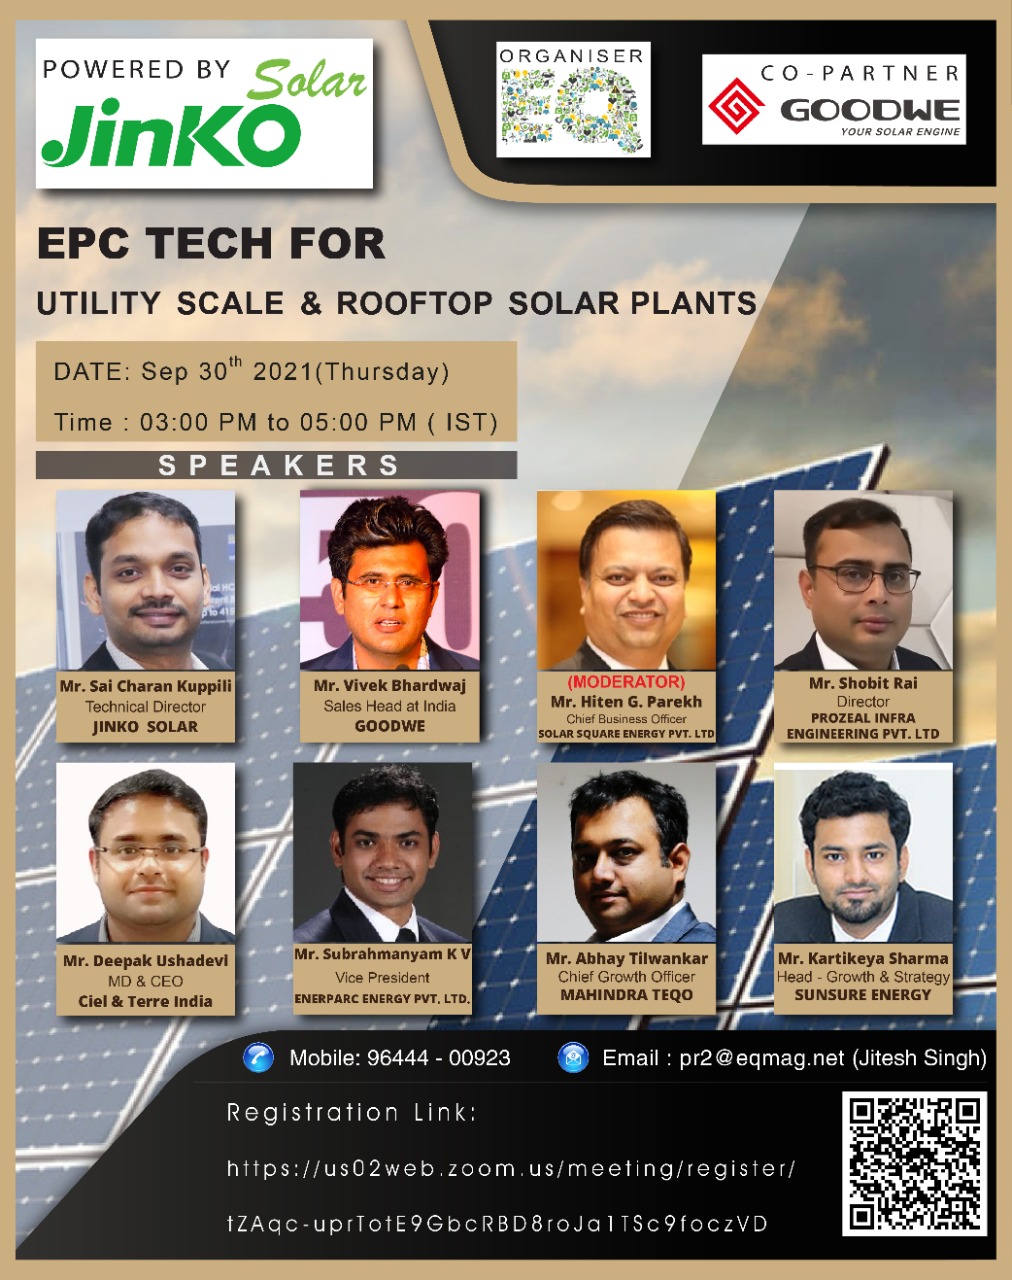 EQ Webinar on EPC Tech for Utility Scale & RoofTop Solar Plants Powered by Jinko Solar On Thursday September 30th From 3:00 PM Onwards…. Register Now !!!